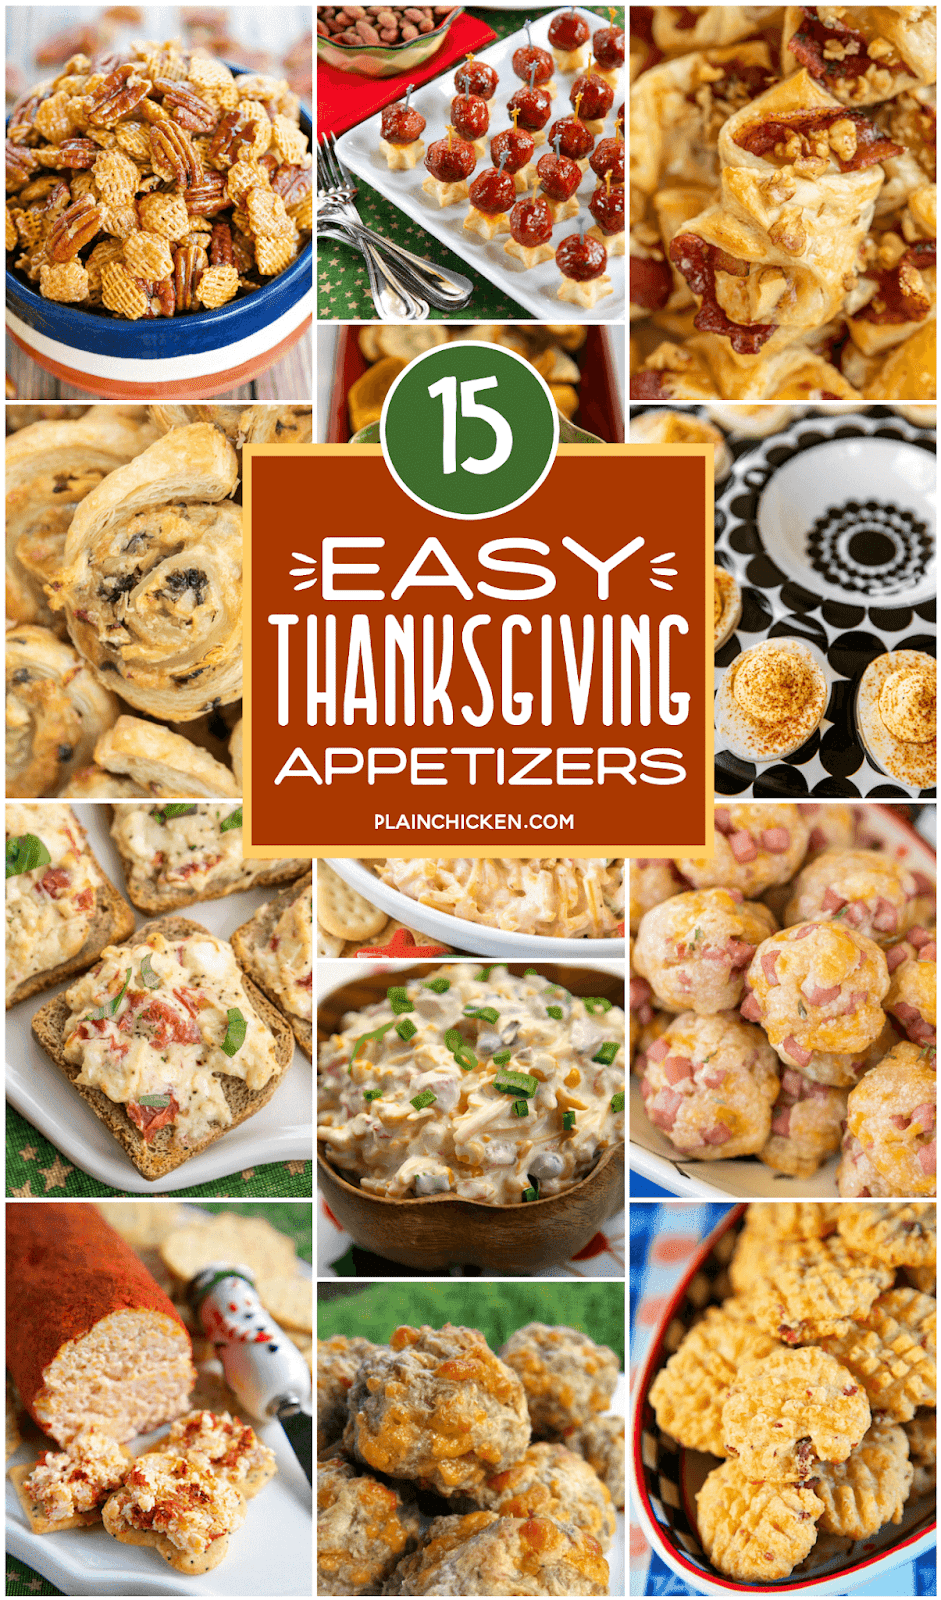 Easy Thanksgiving Appetizers | Plain Chicken®